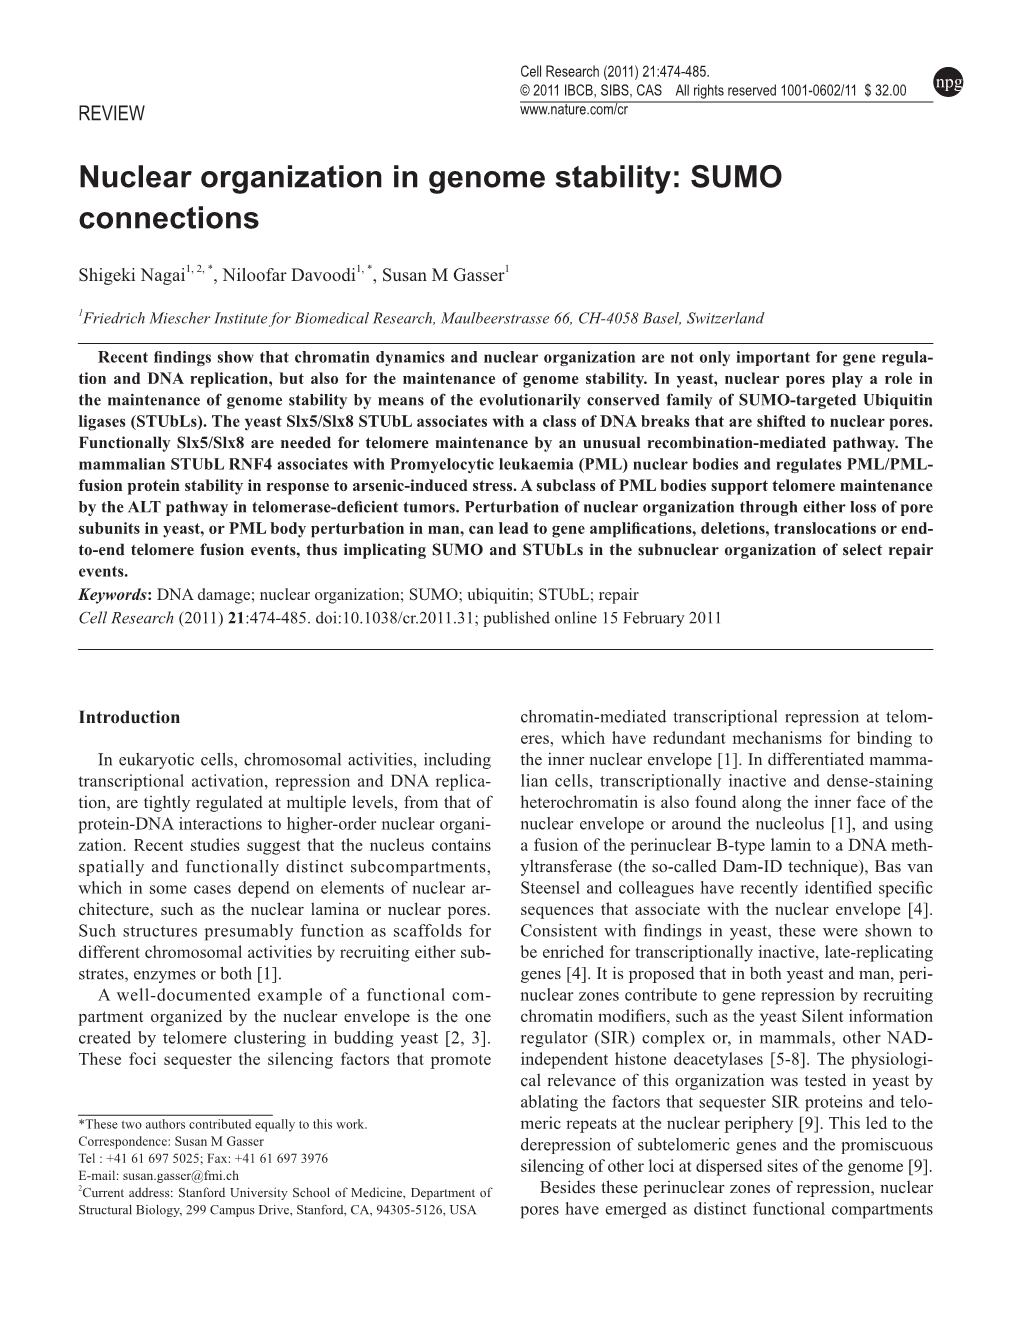 Nuclear Organization in Genome Stability: SUMO Cell Research (2011) 21:474-485